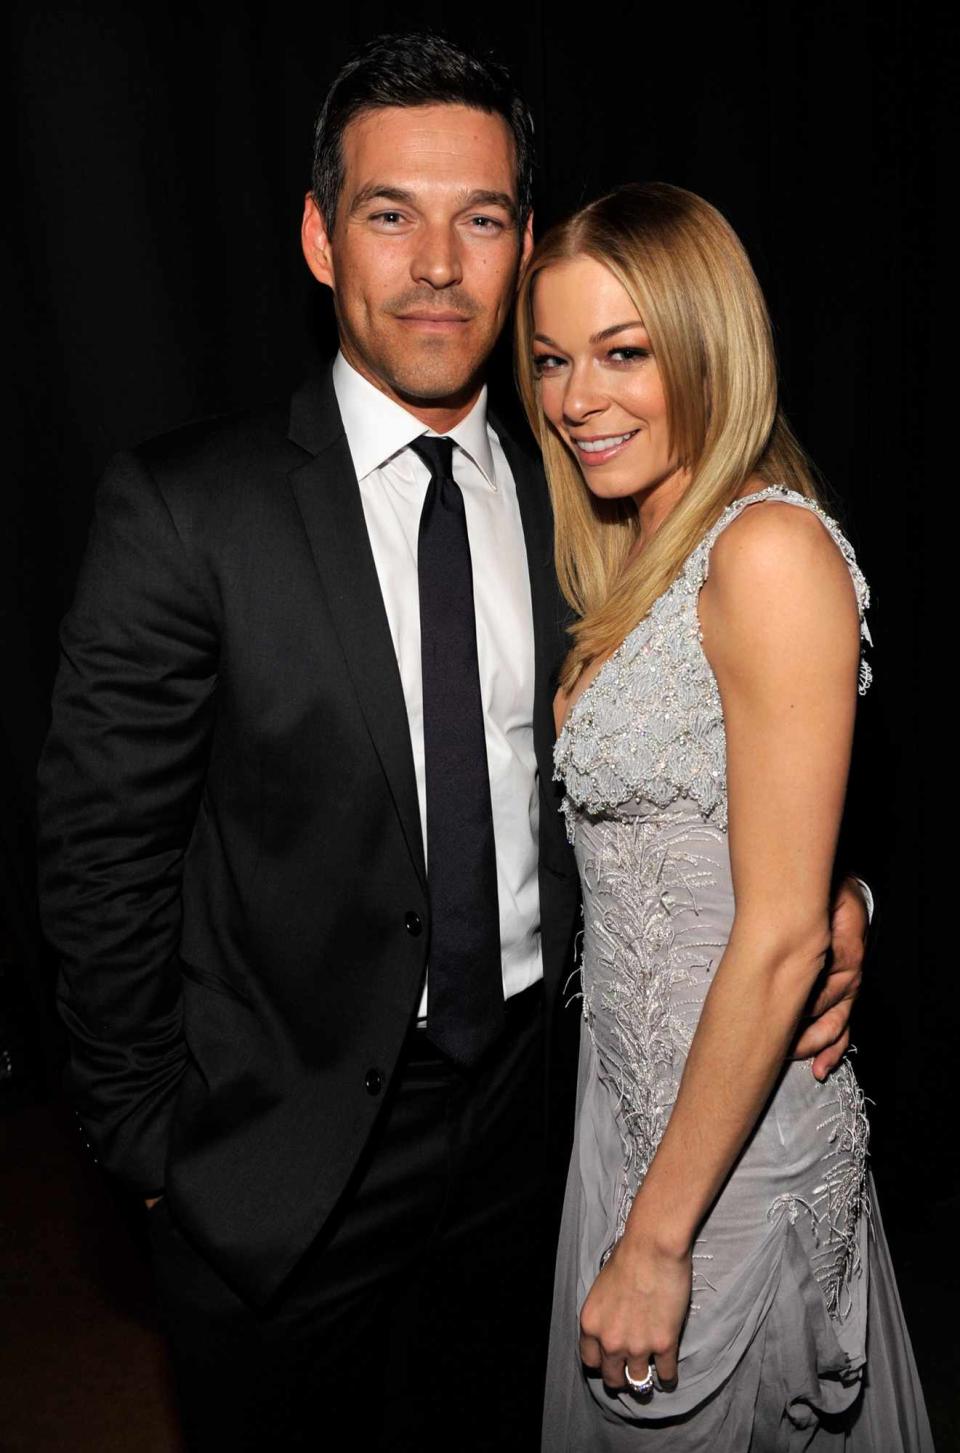 Eddie Cibrian and LeAnn Rimes attends 2011 MusiCares Person of the Year Tribute to Barbra Streisand at Los Angeles Convention Center on February 11, 2011 in Los Angeles, California.